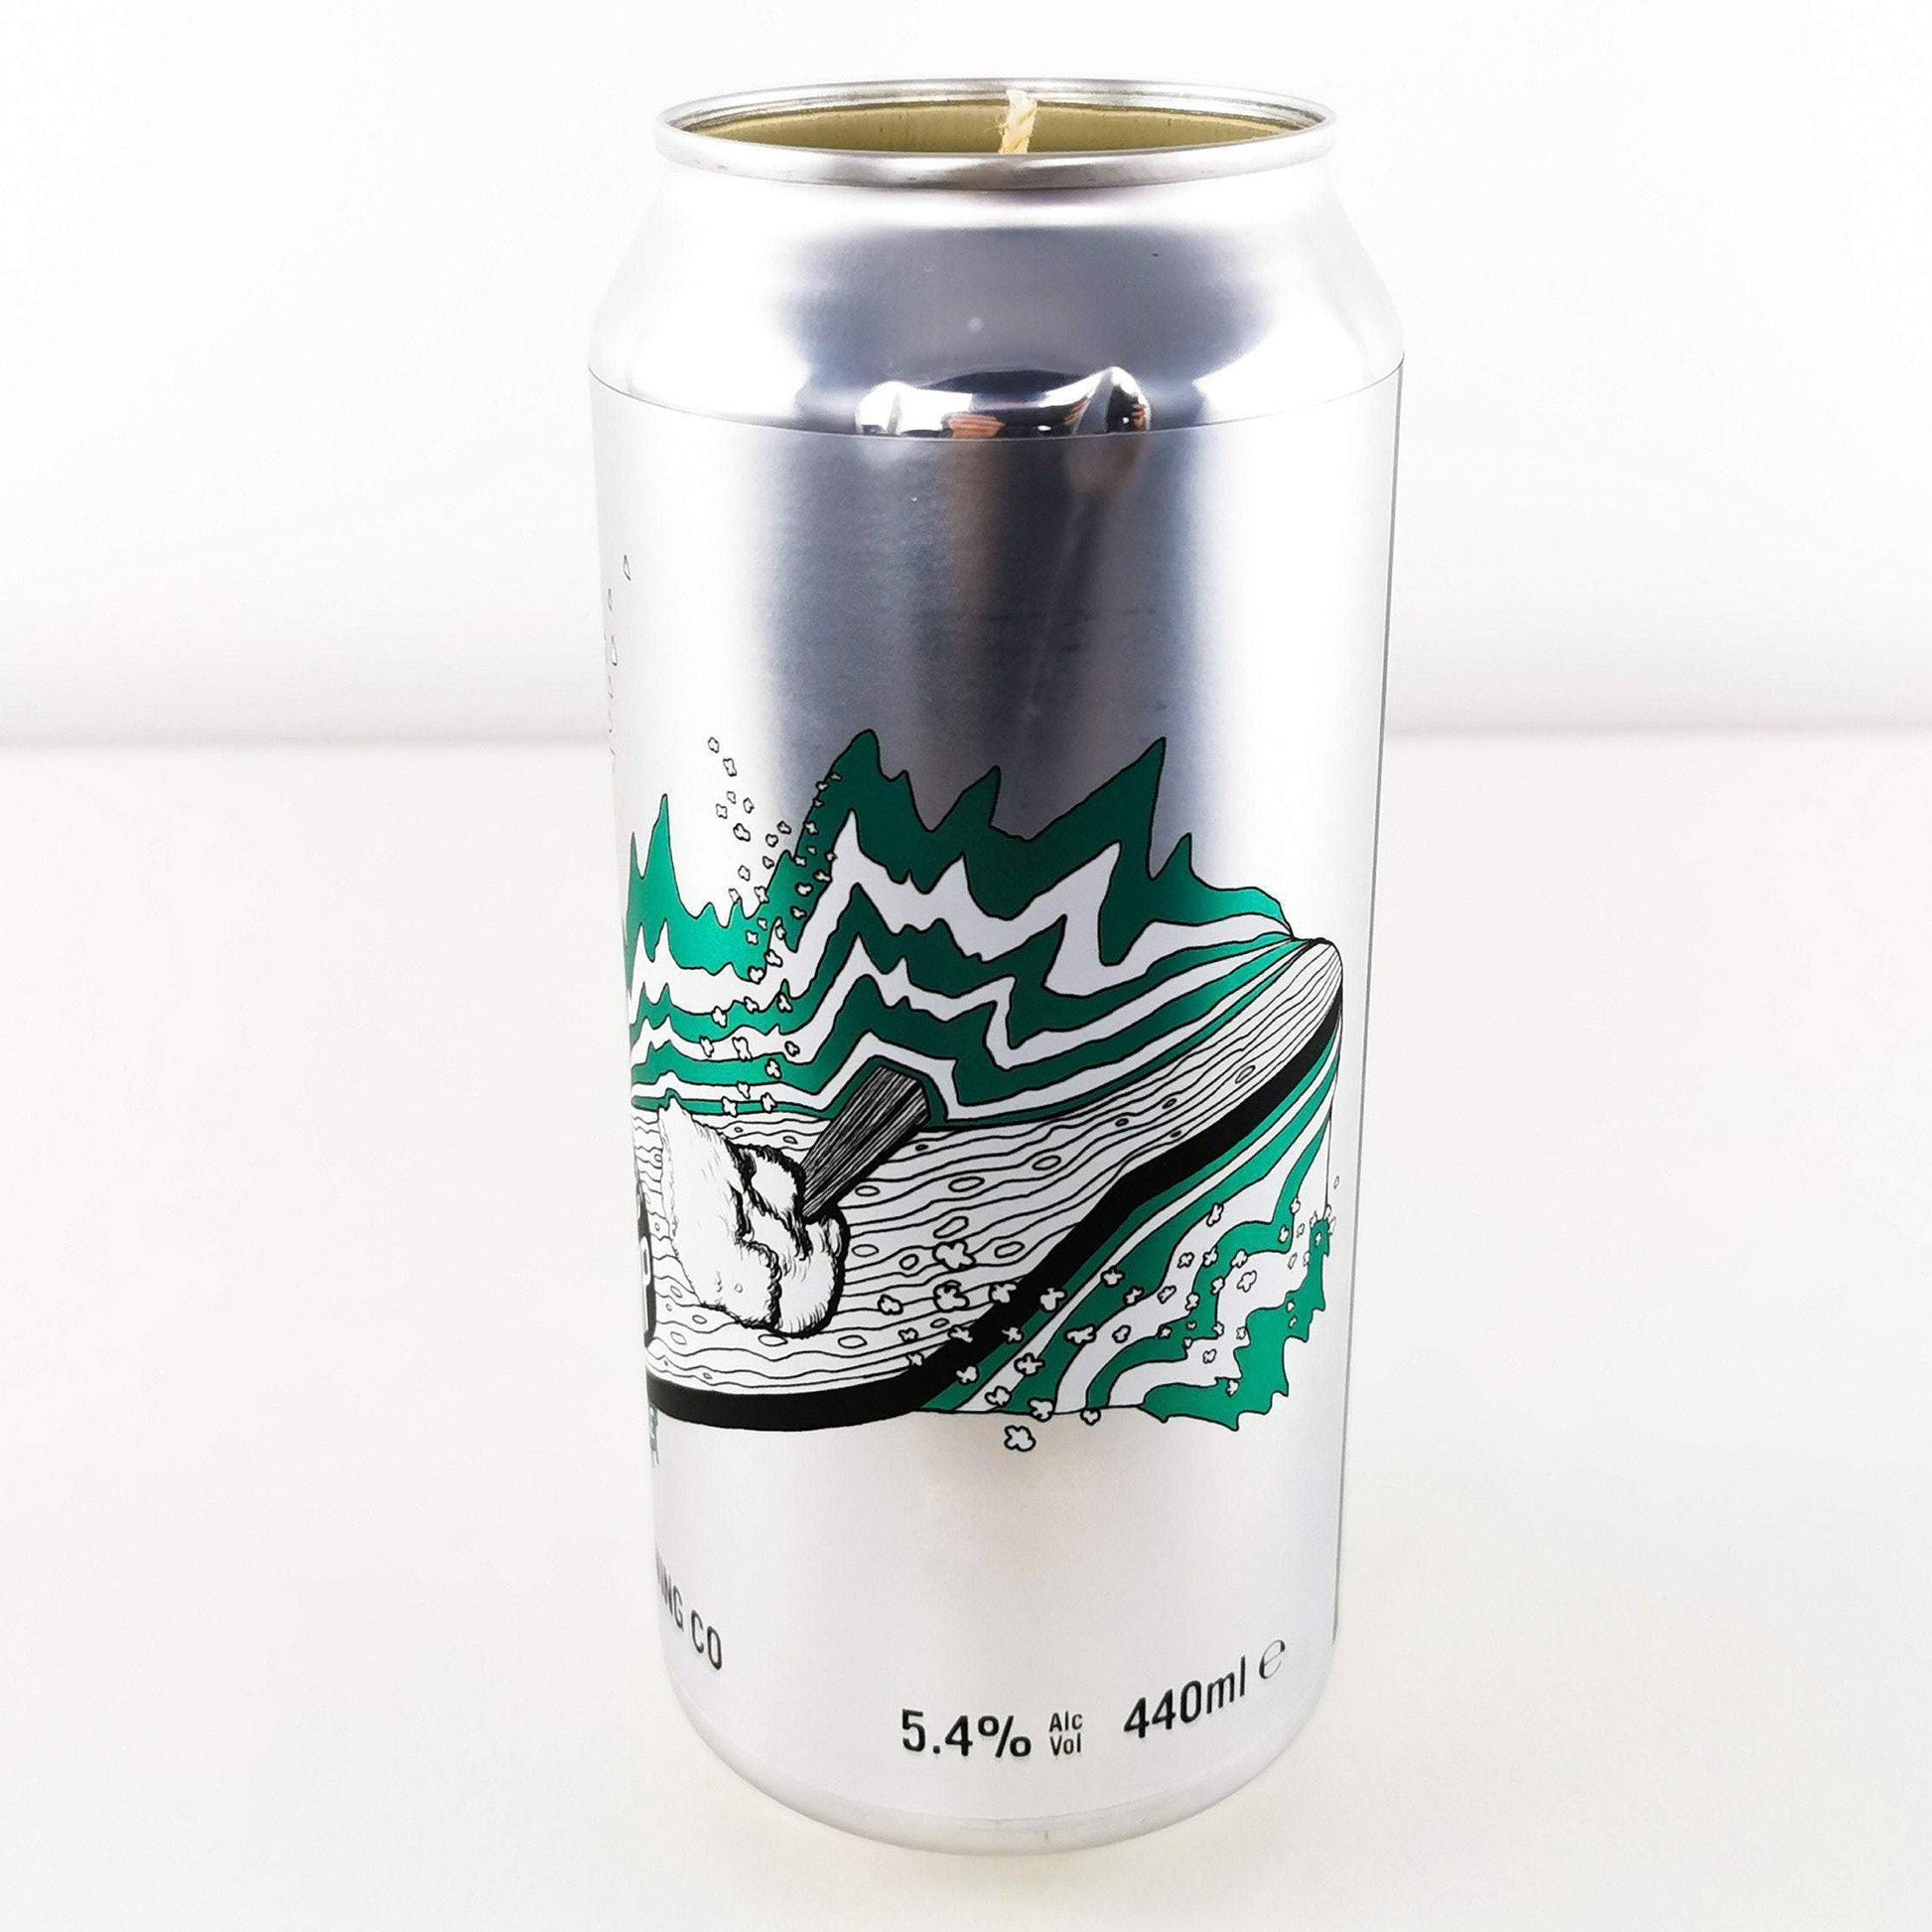 Fat Lamp Wild Horse Brewing Beer Can Candle Beer Can Candles Adhock Homeware